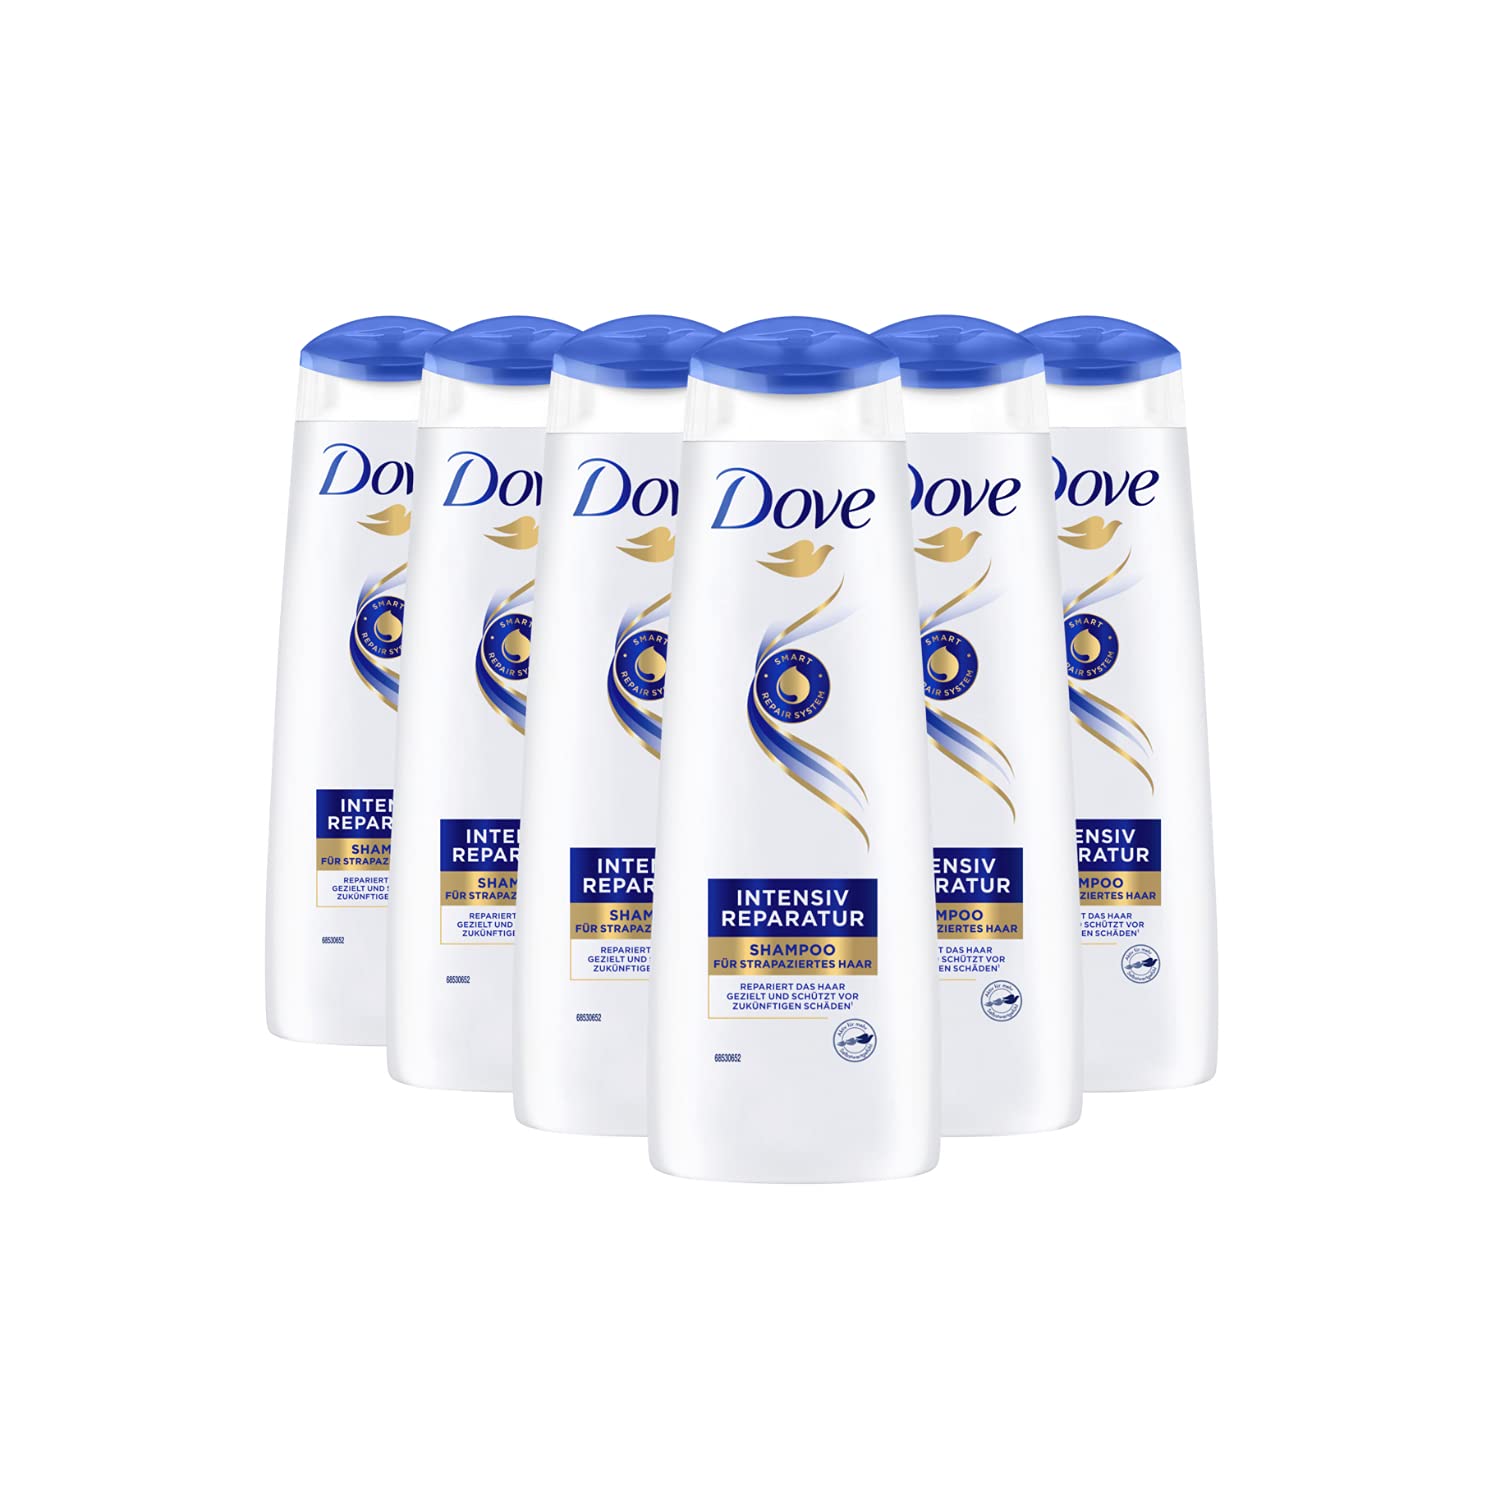 Dove Nutritive Solutions intensive repair for damaged hair shampoo with keratin repair system, pack of 6 (6 x 250 ml)